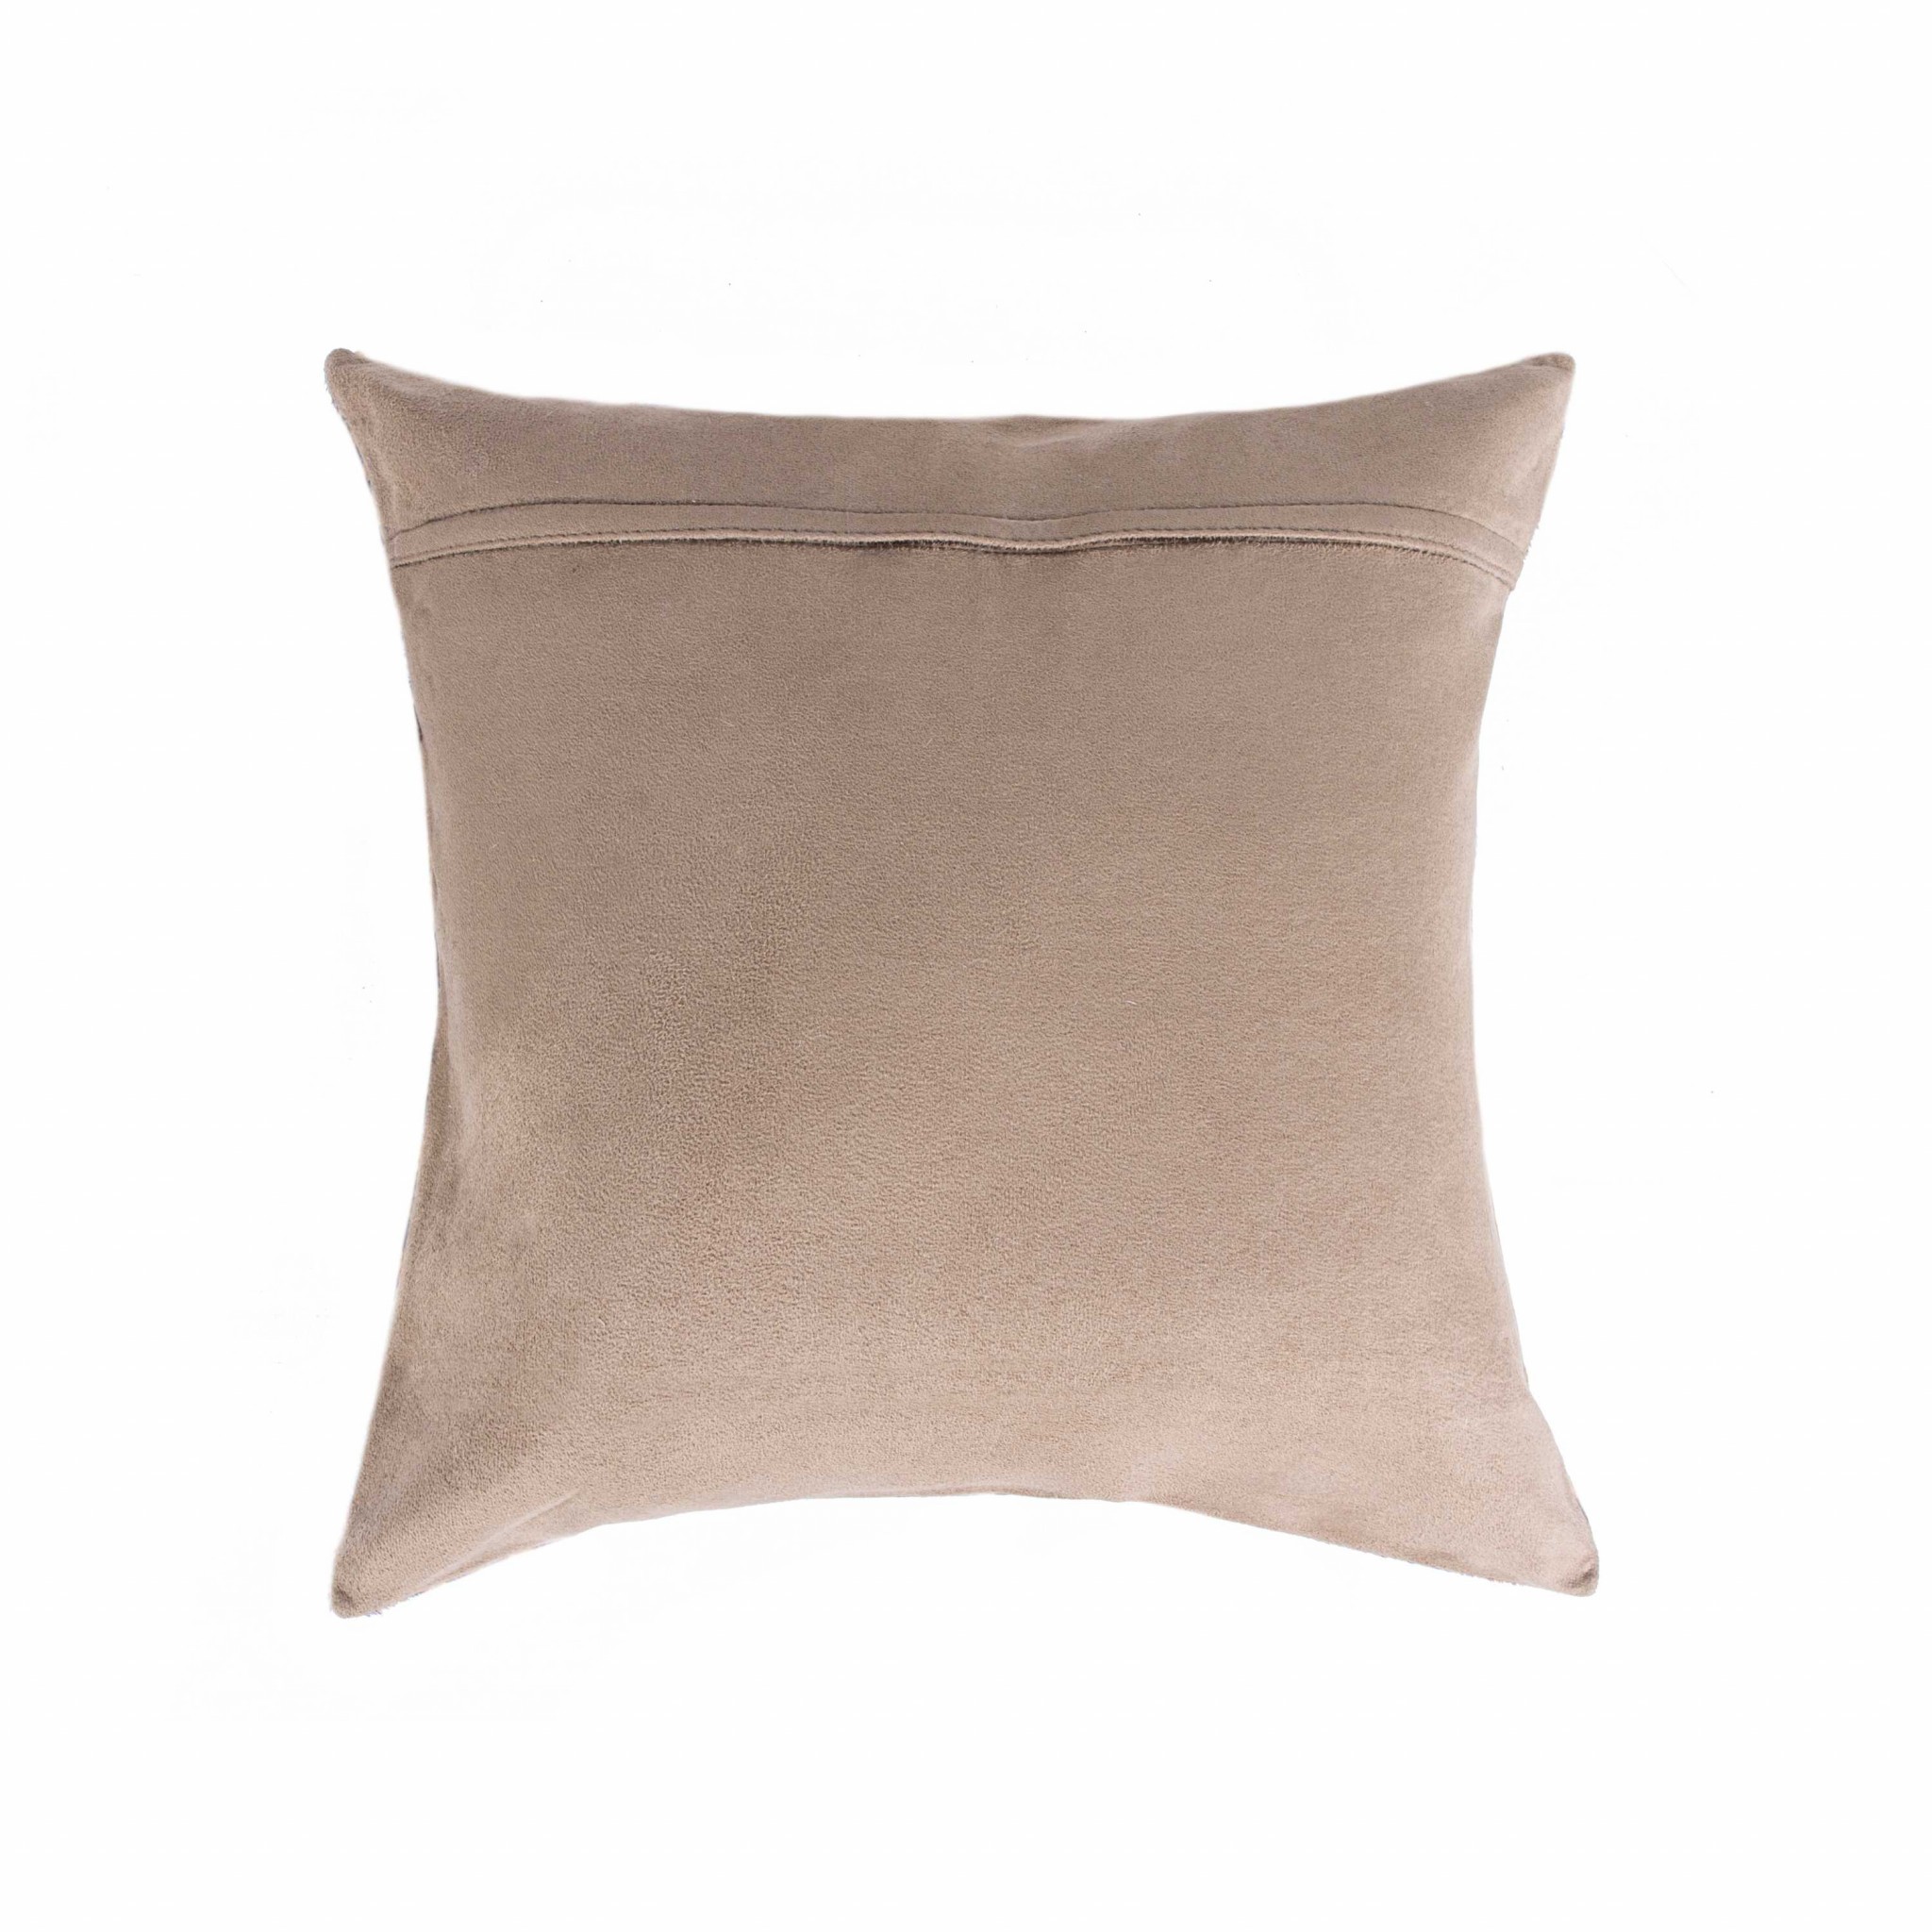 18" x 18" x 5" Brown And White Cowhide - Pillow